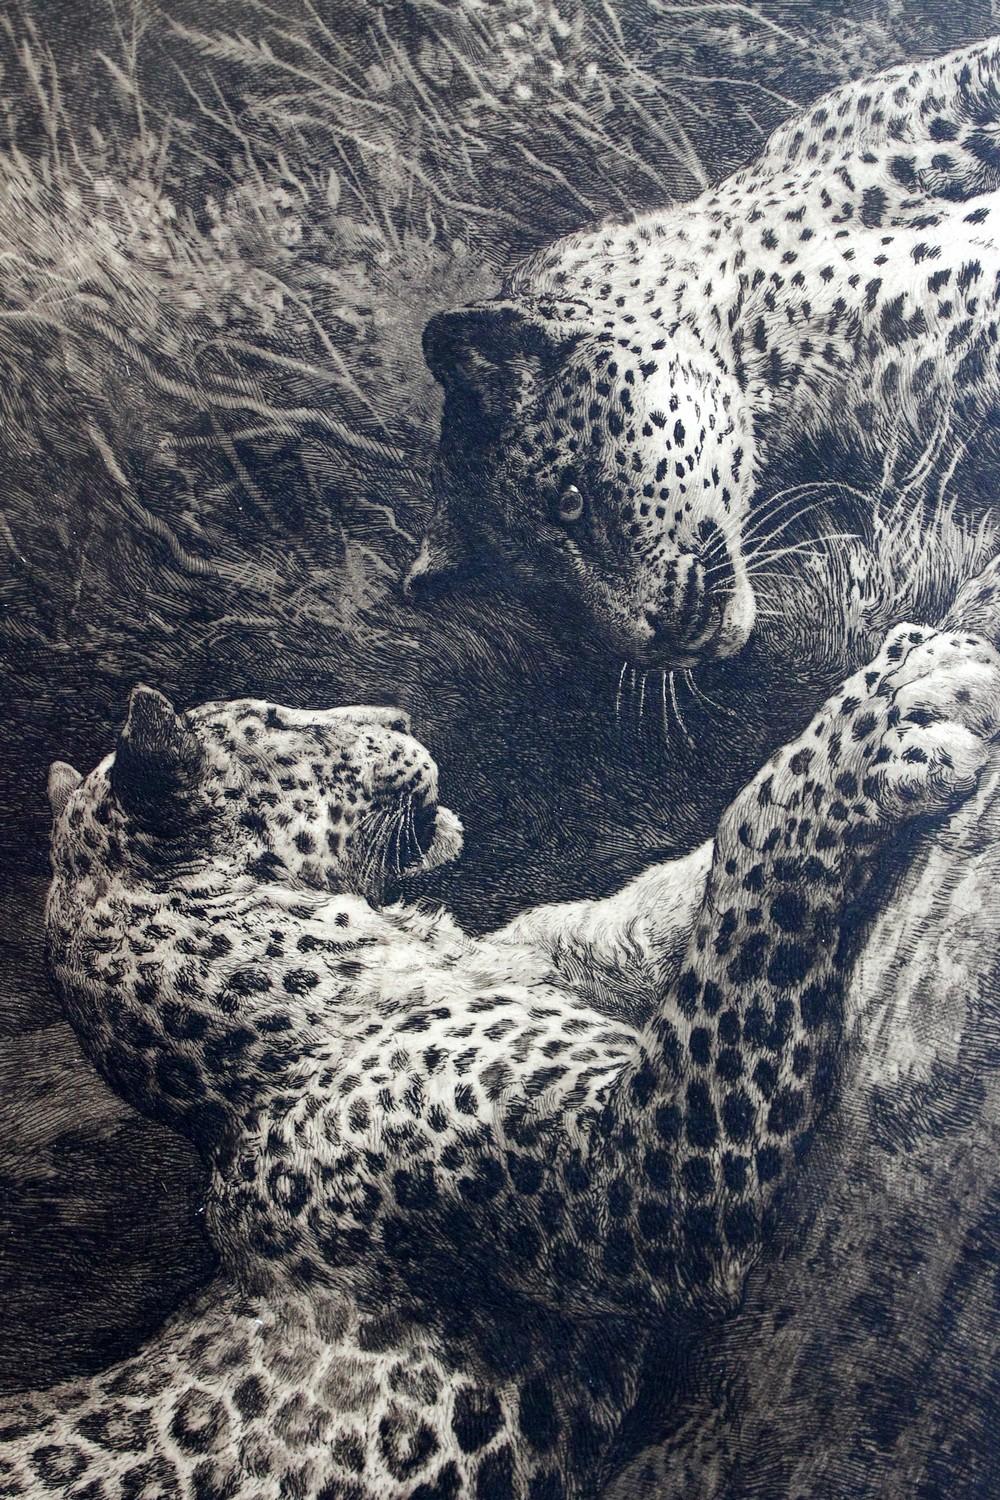 Antique Black and White Etching with Leopards Playing  - Art Nouveau Print by Herbert Dicksee